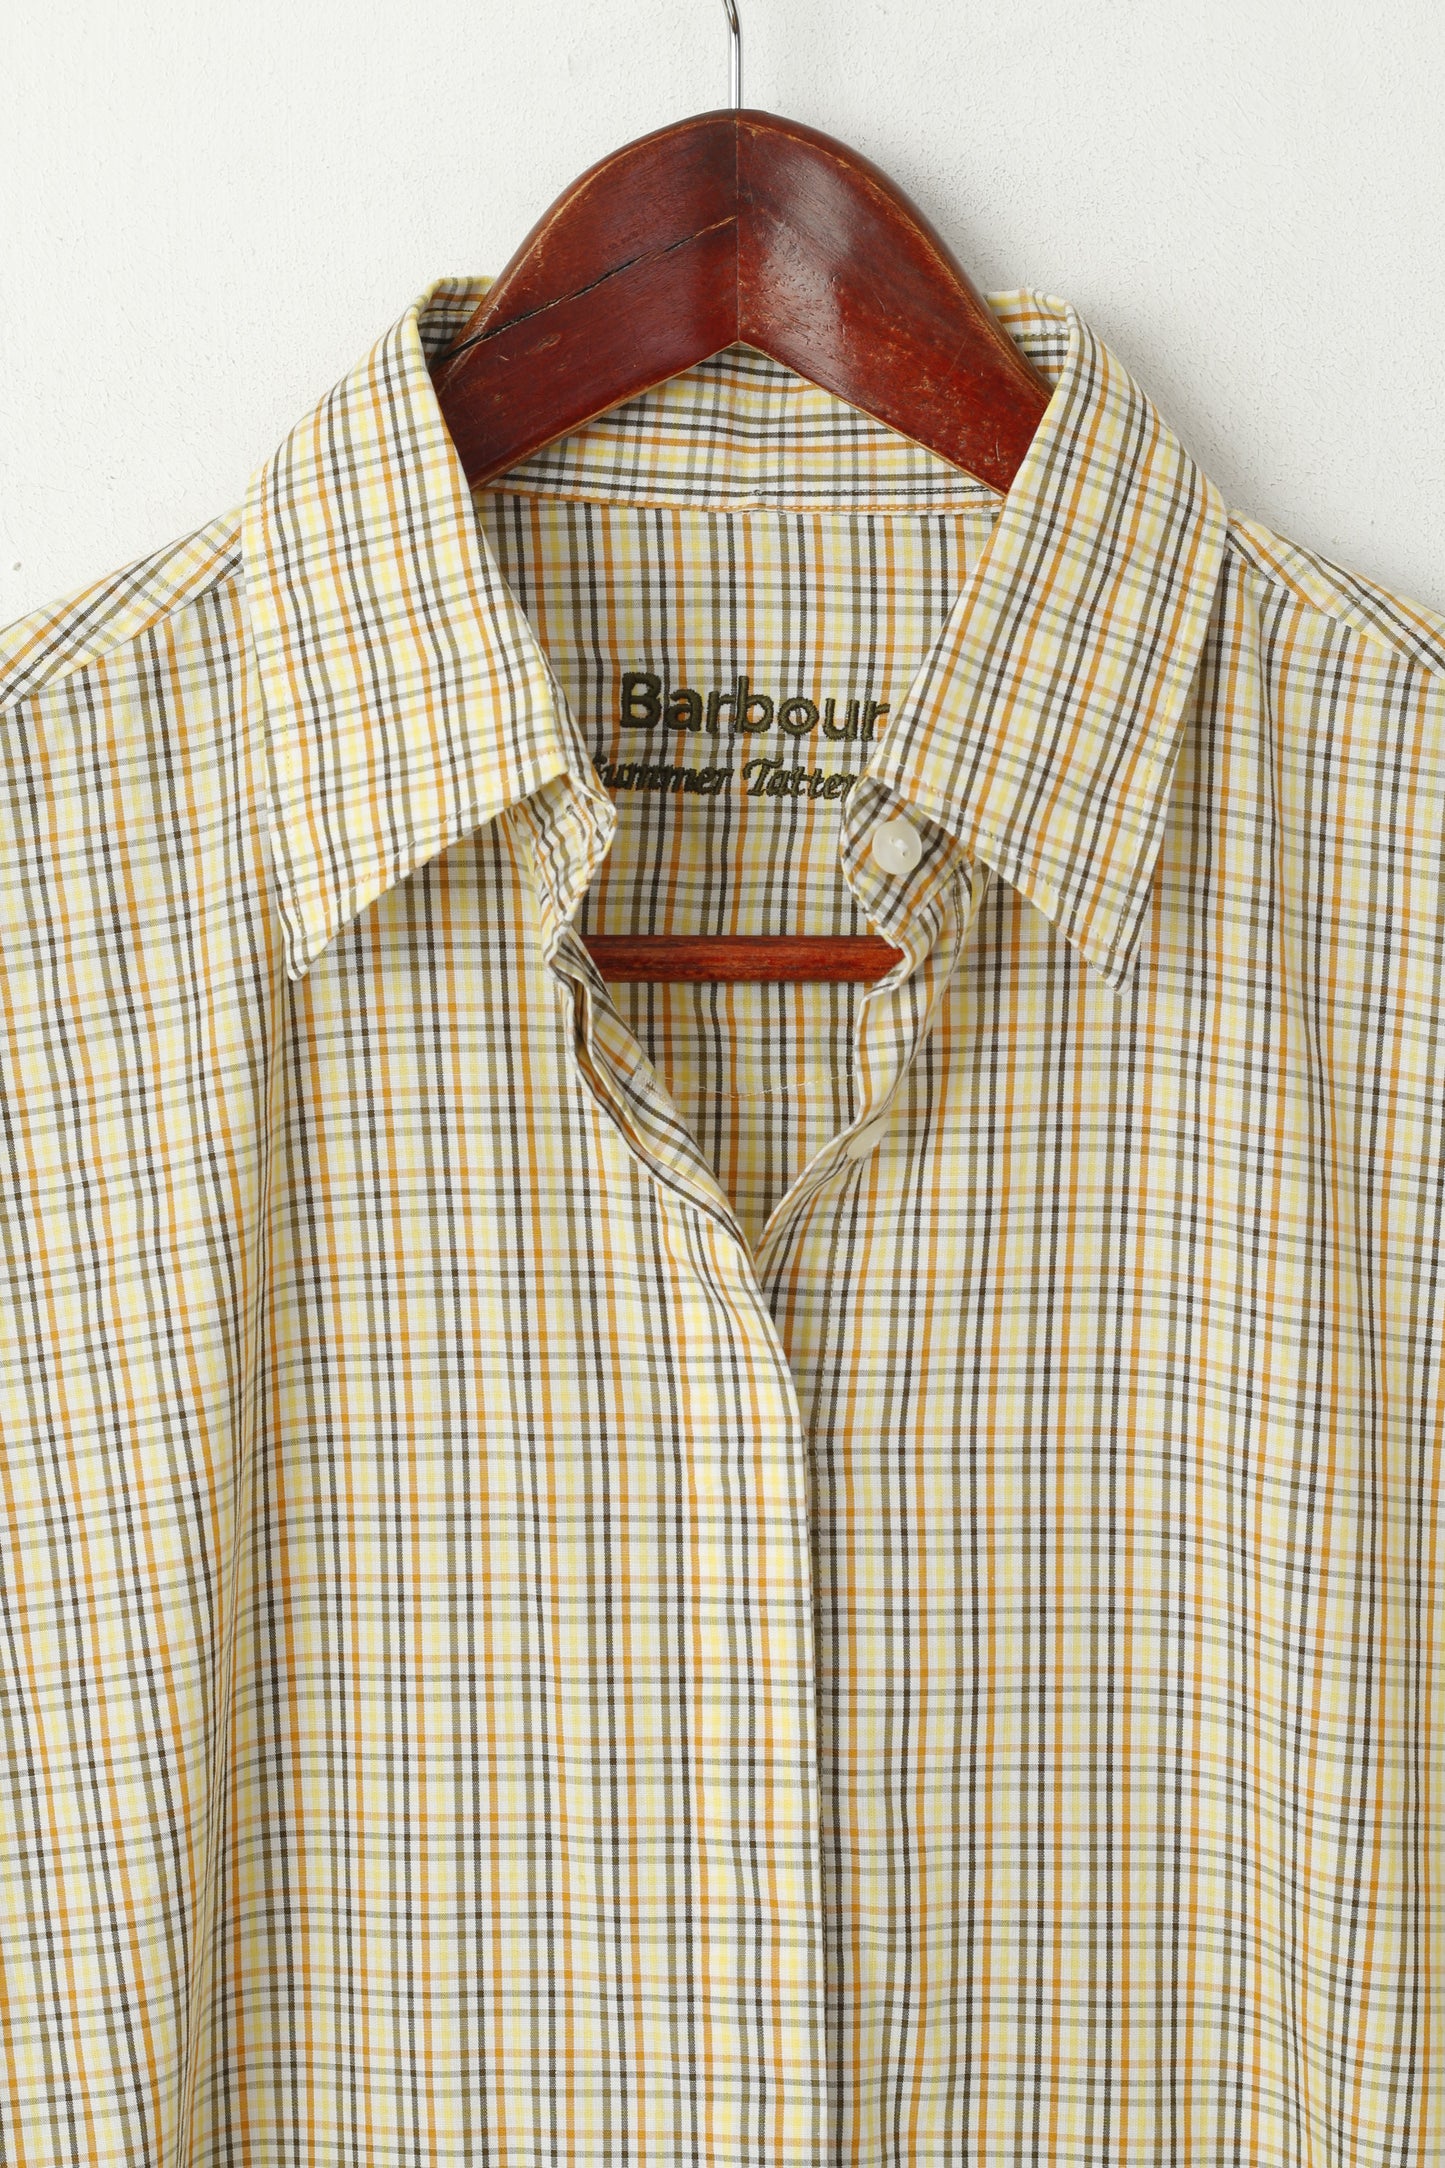 Barbour Women 12 38 M Casual Shirt Yellow Check Long Sleeve Tattersall Cotton Top